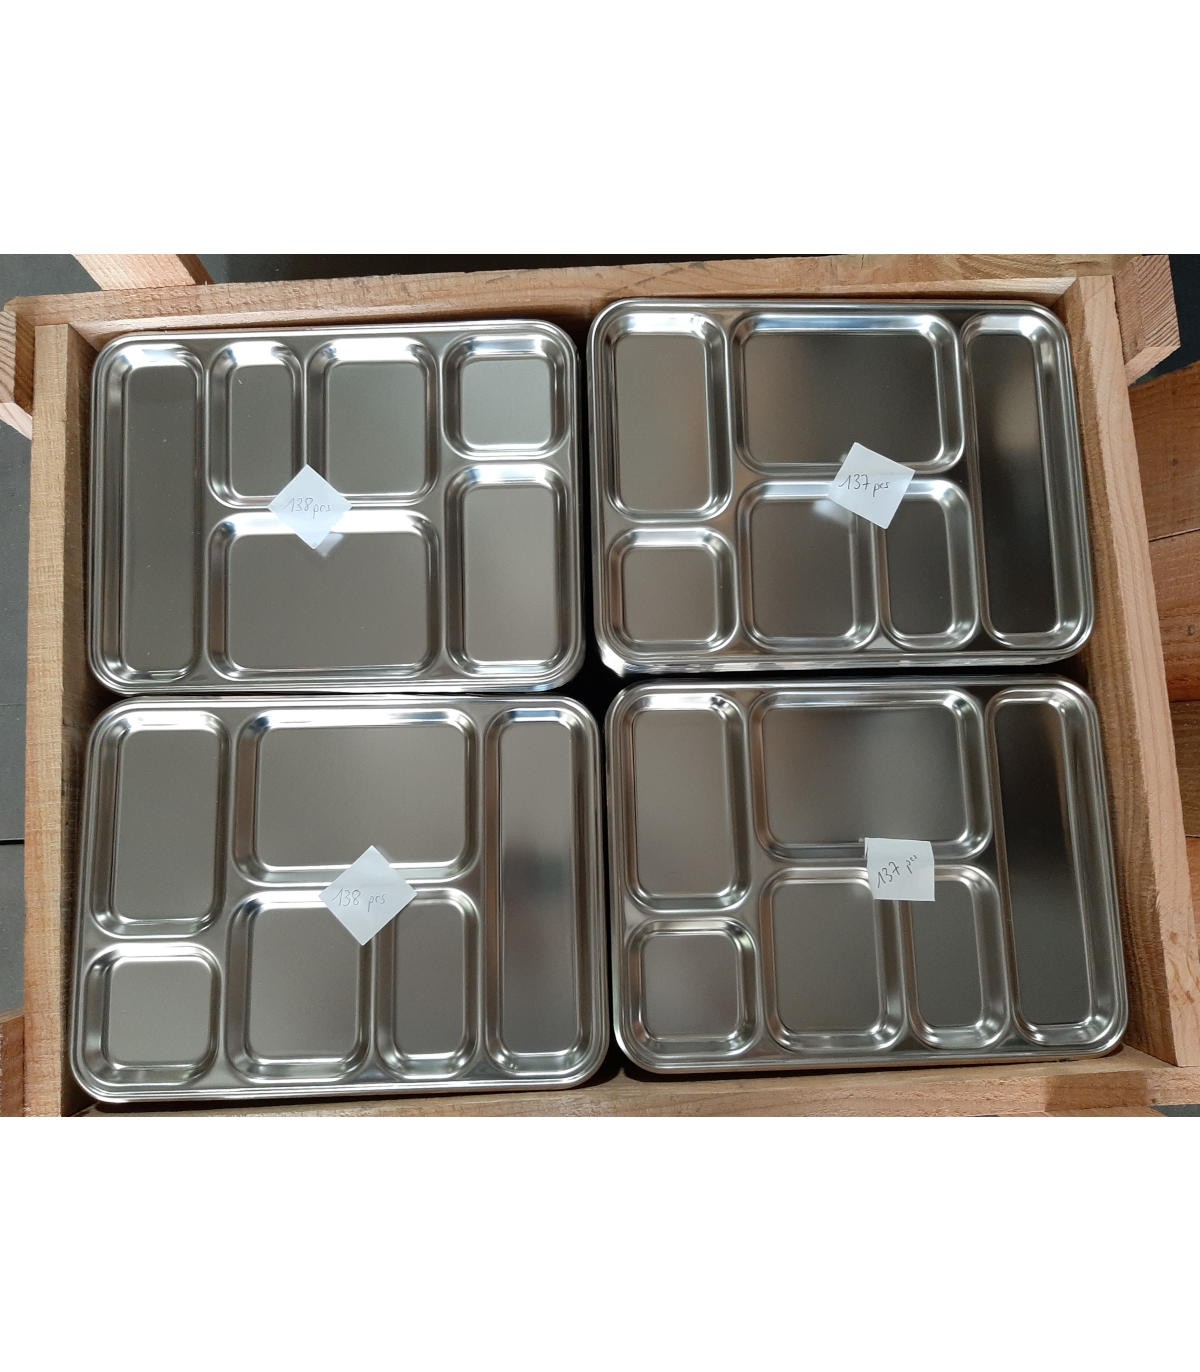 Stainless steel tray with 5 compartments 26,5 x 26,5 cm flat edge rounded  corners